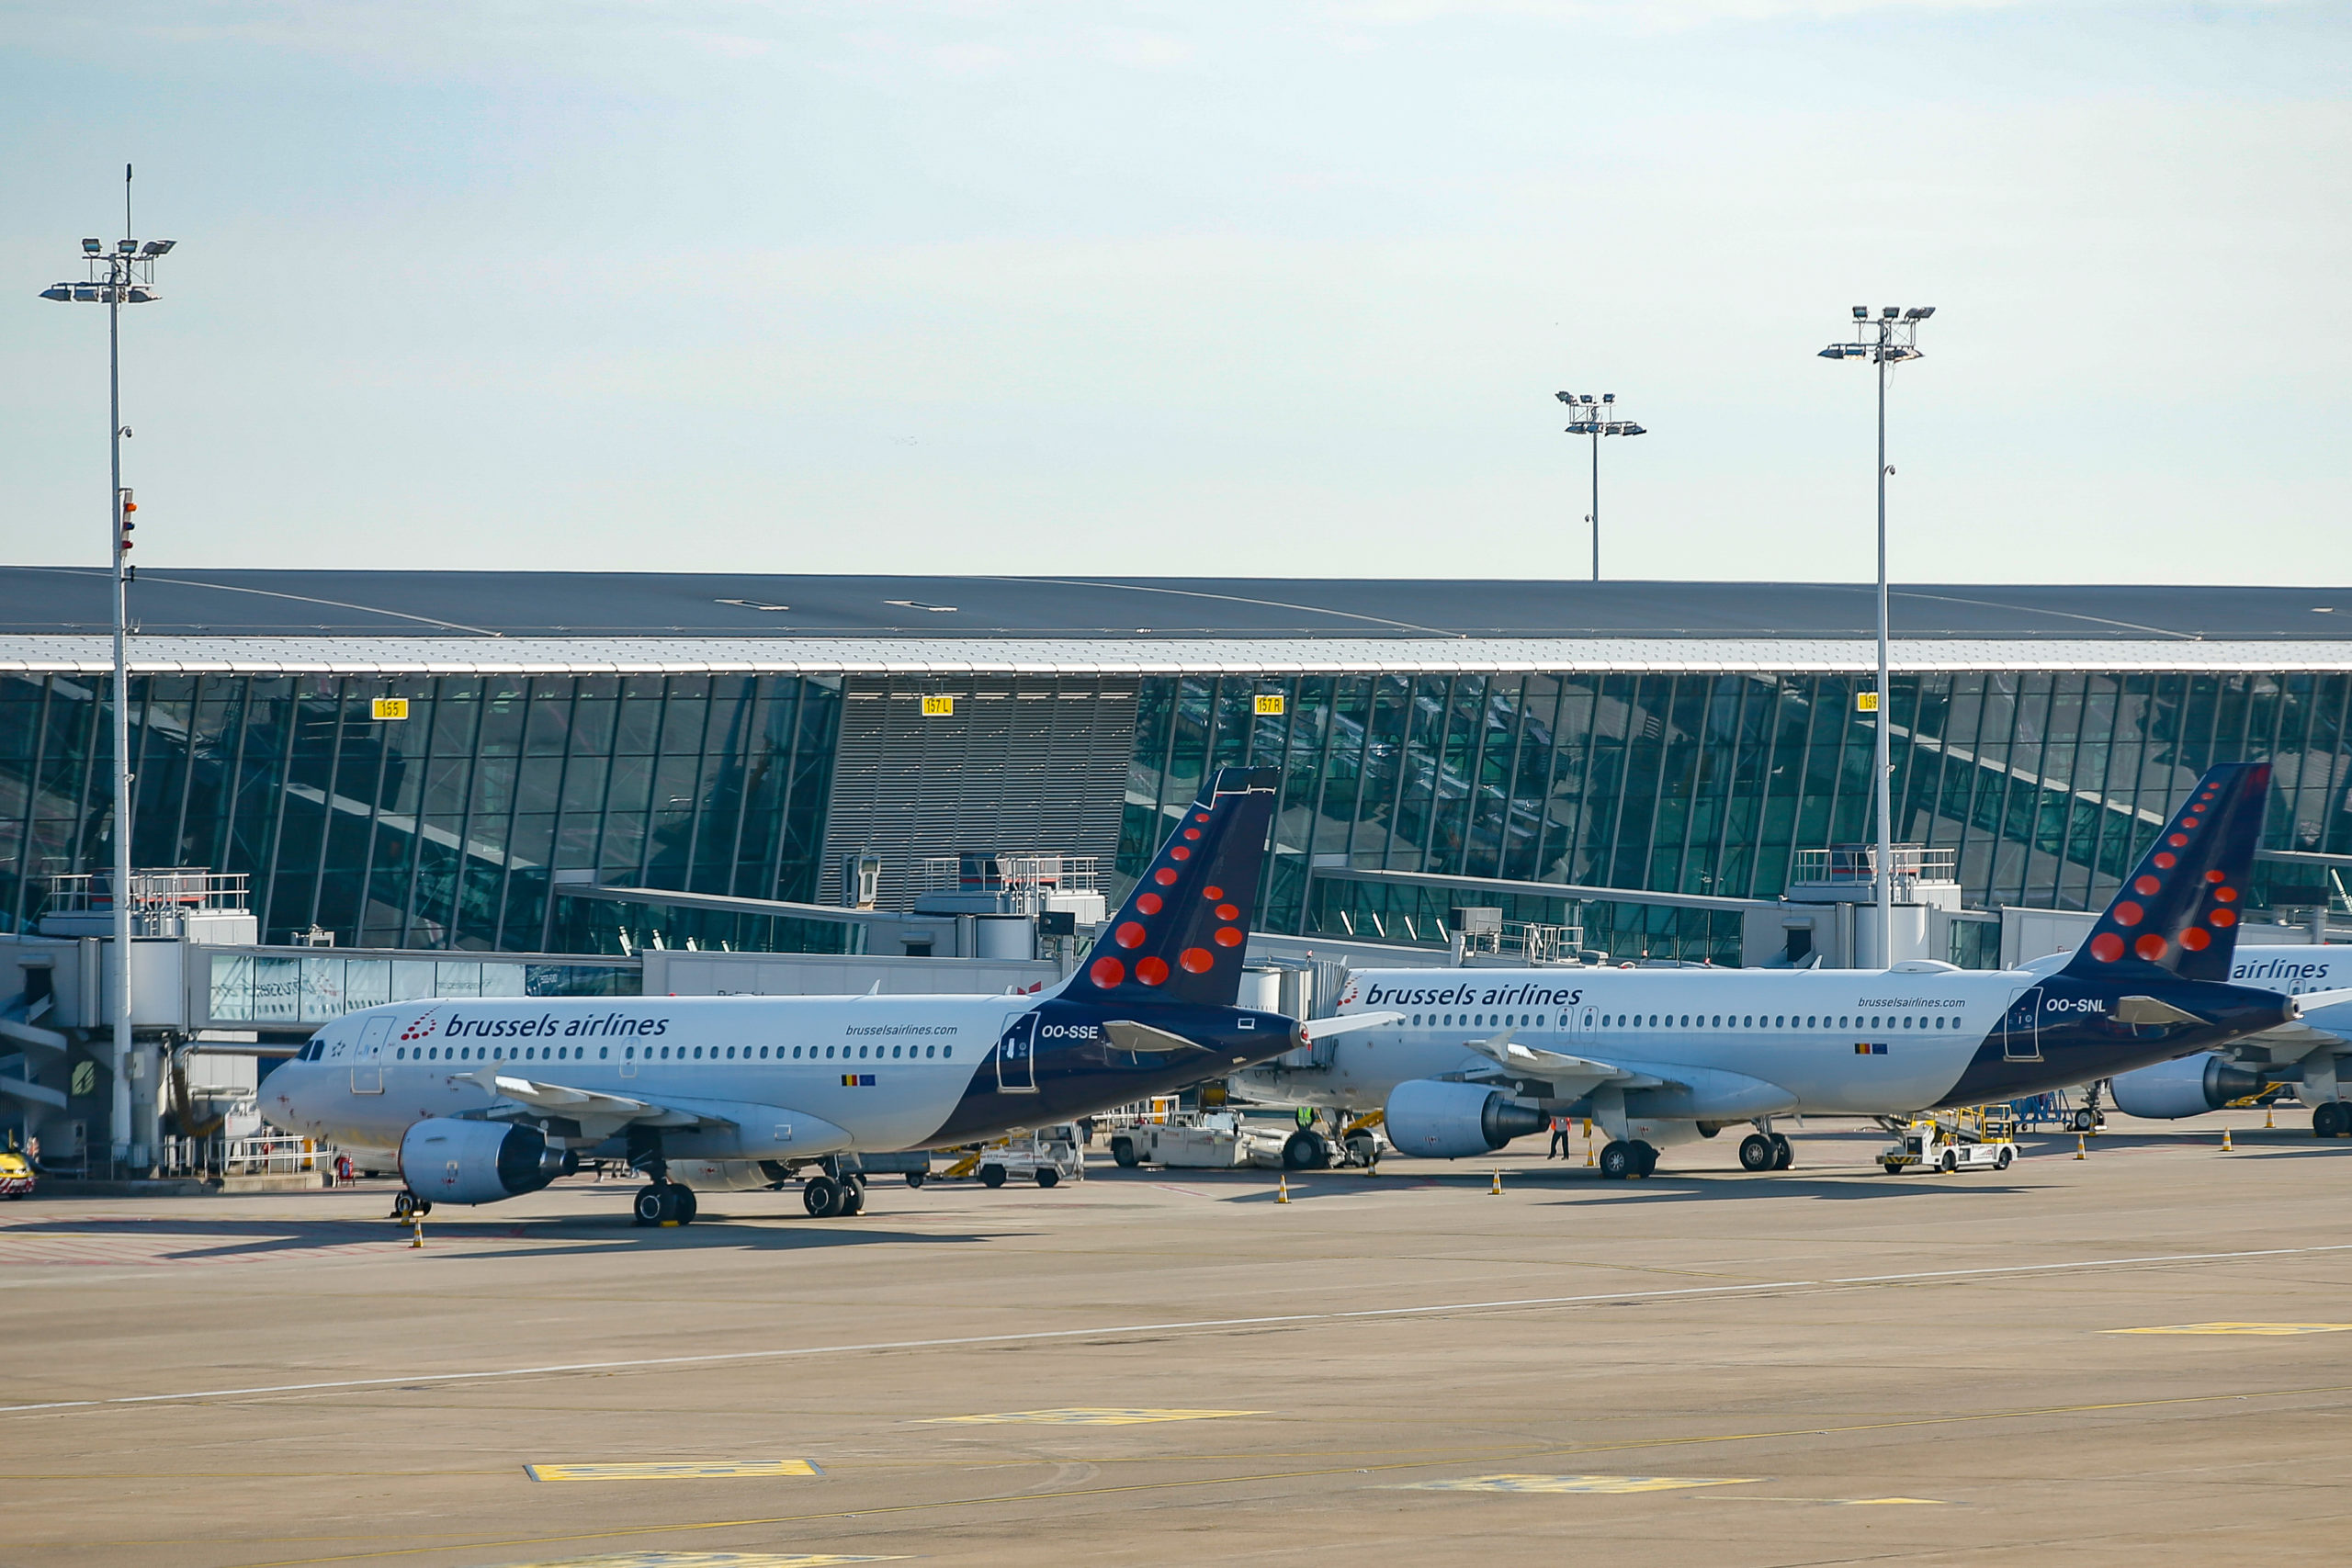 Brussels Airport still offers 120 destinations this winter